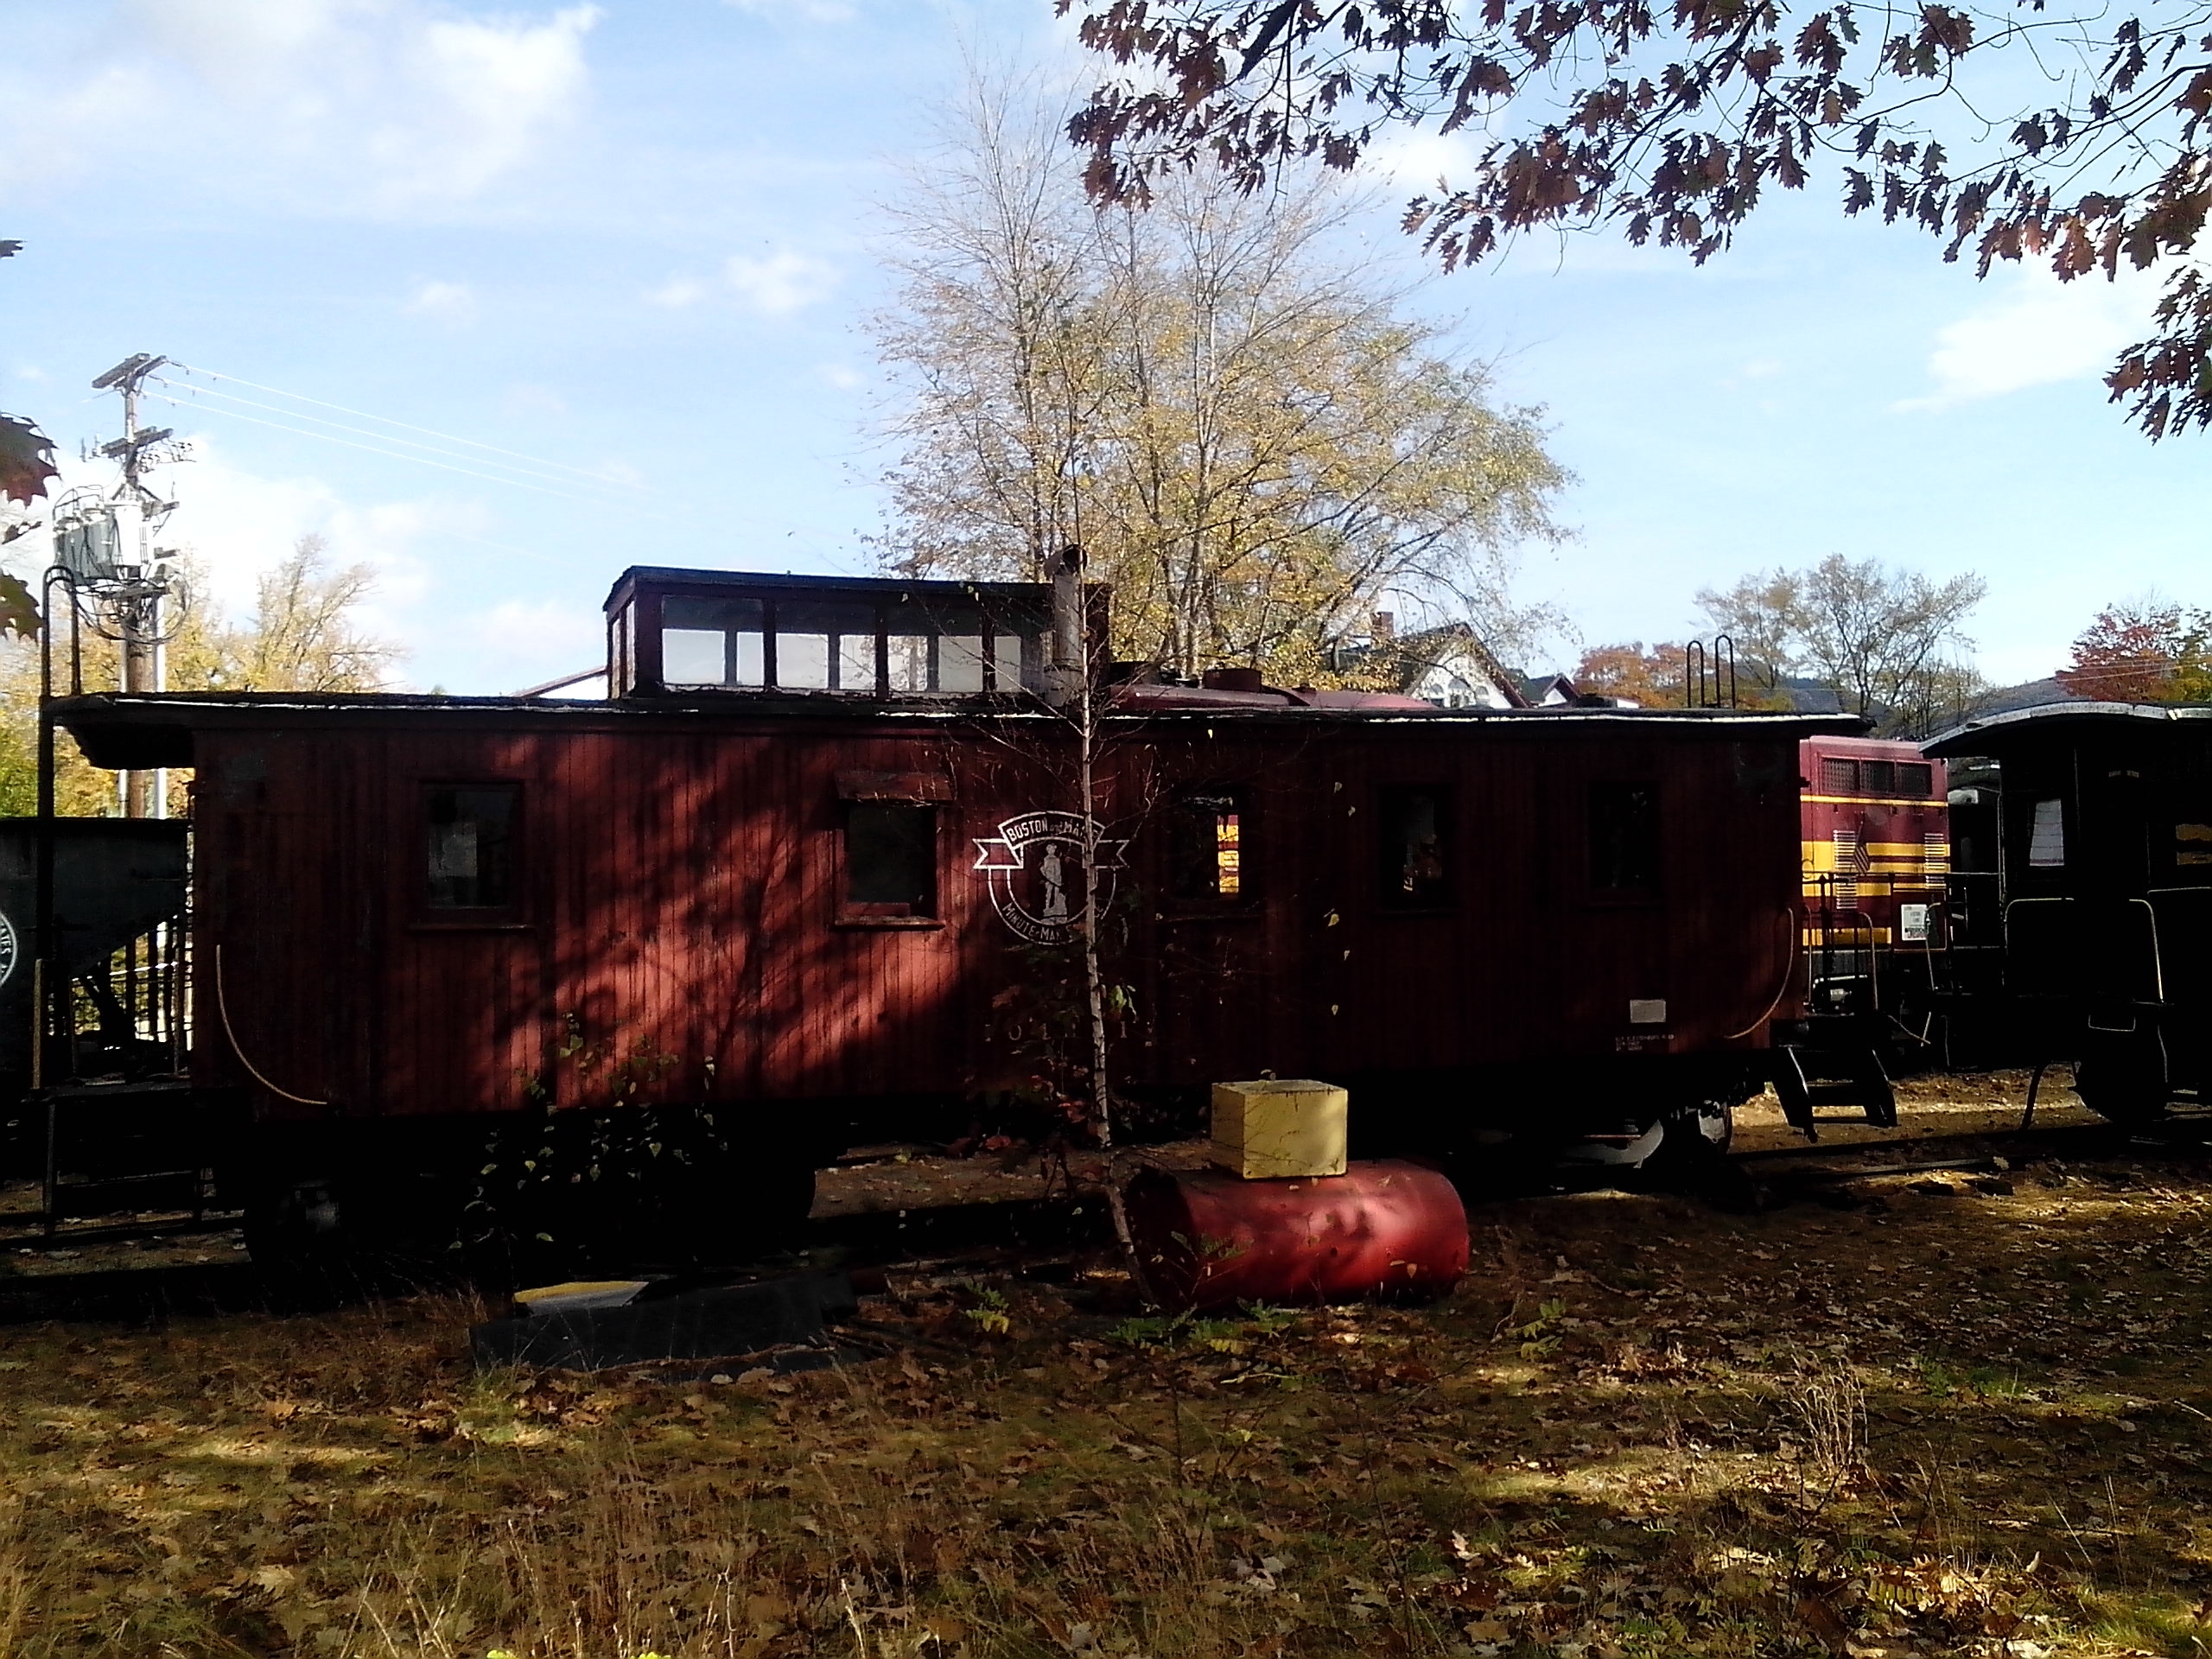 Caboose B&M 104391 and Marker